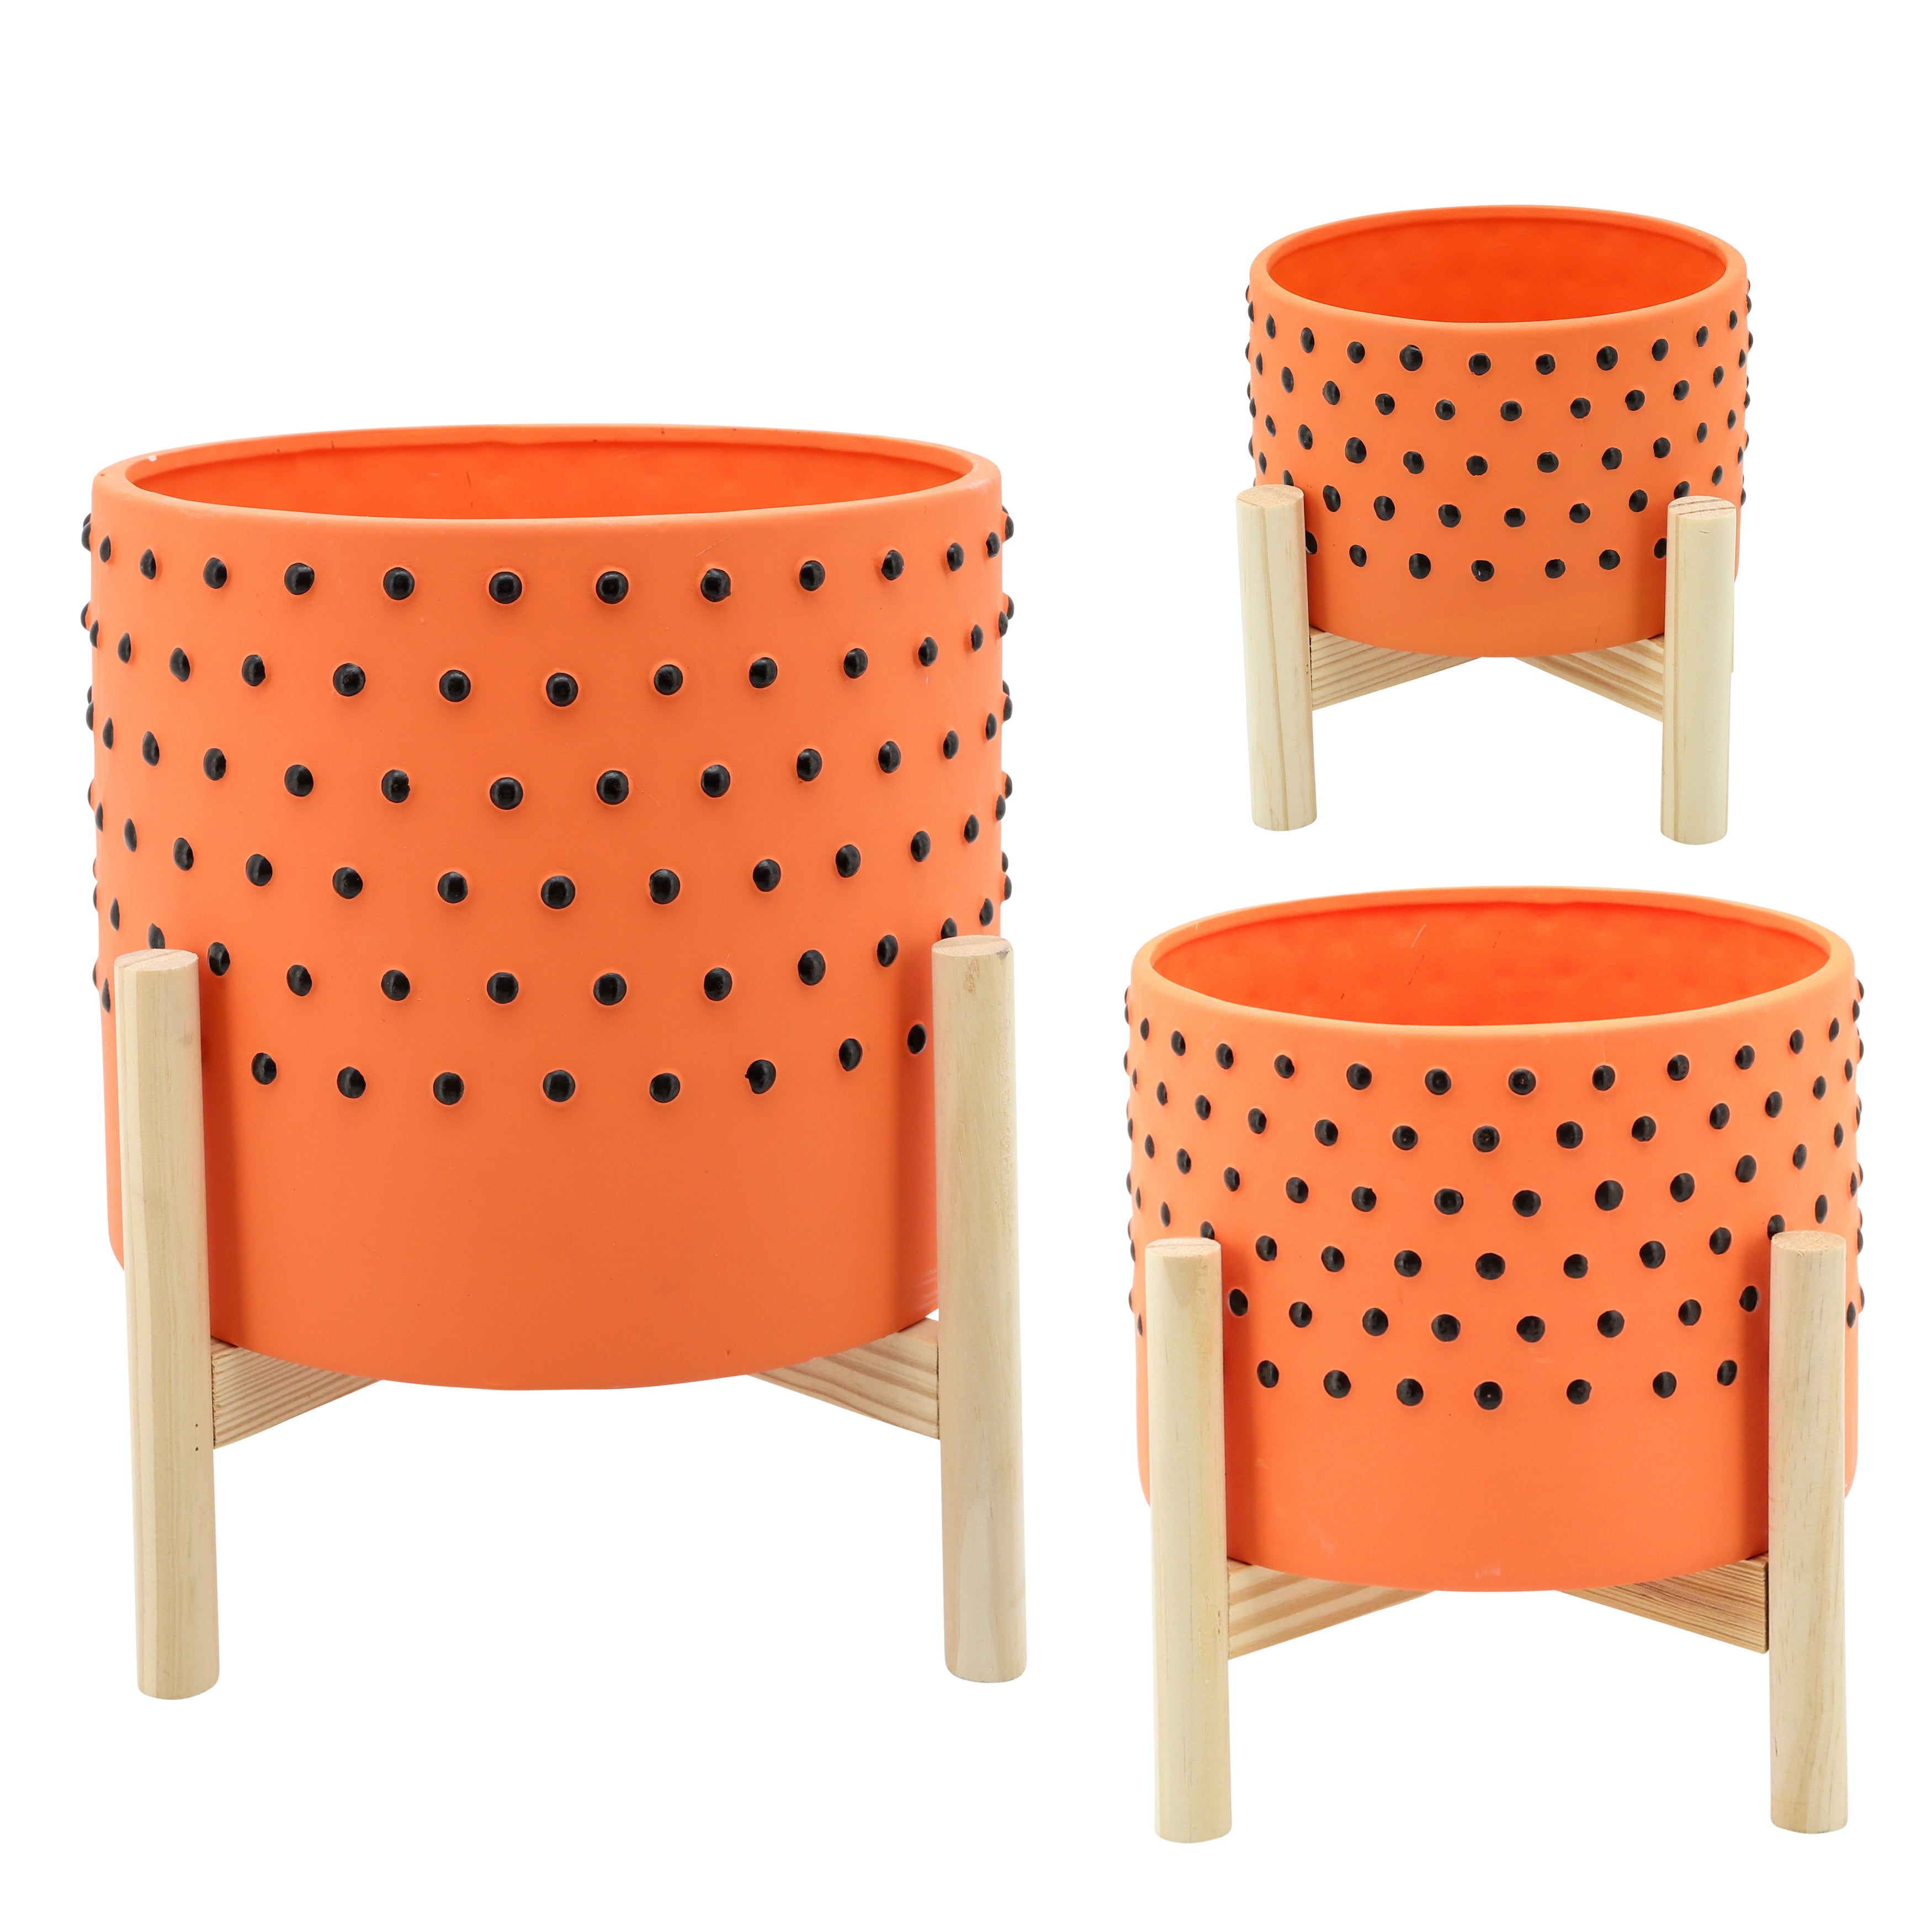 10" Dotted Planter with Wood Stand, Orange, Planters